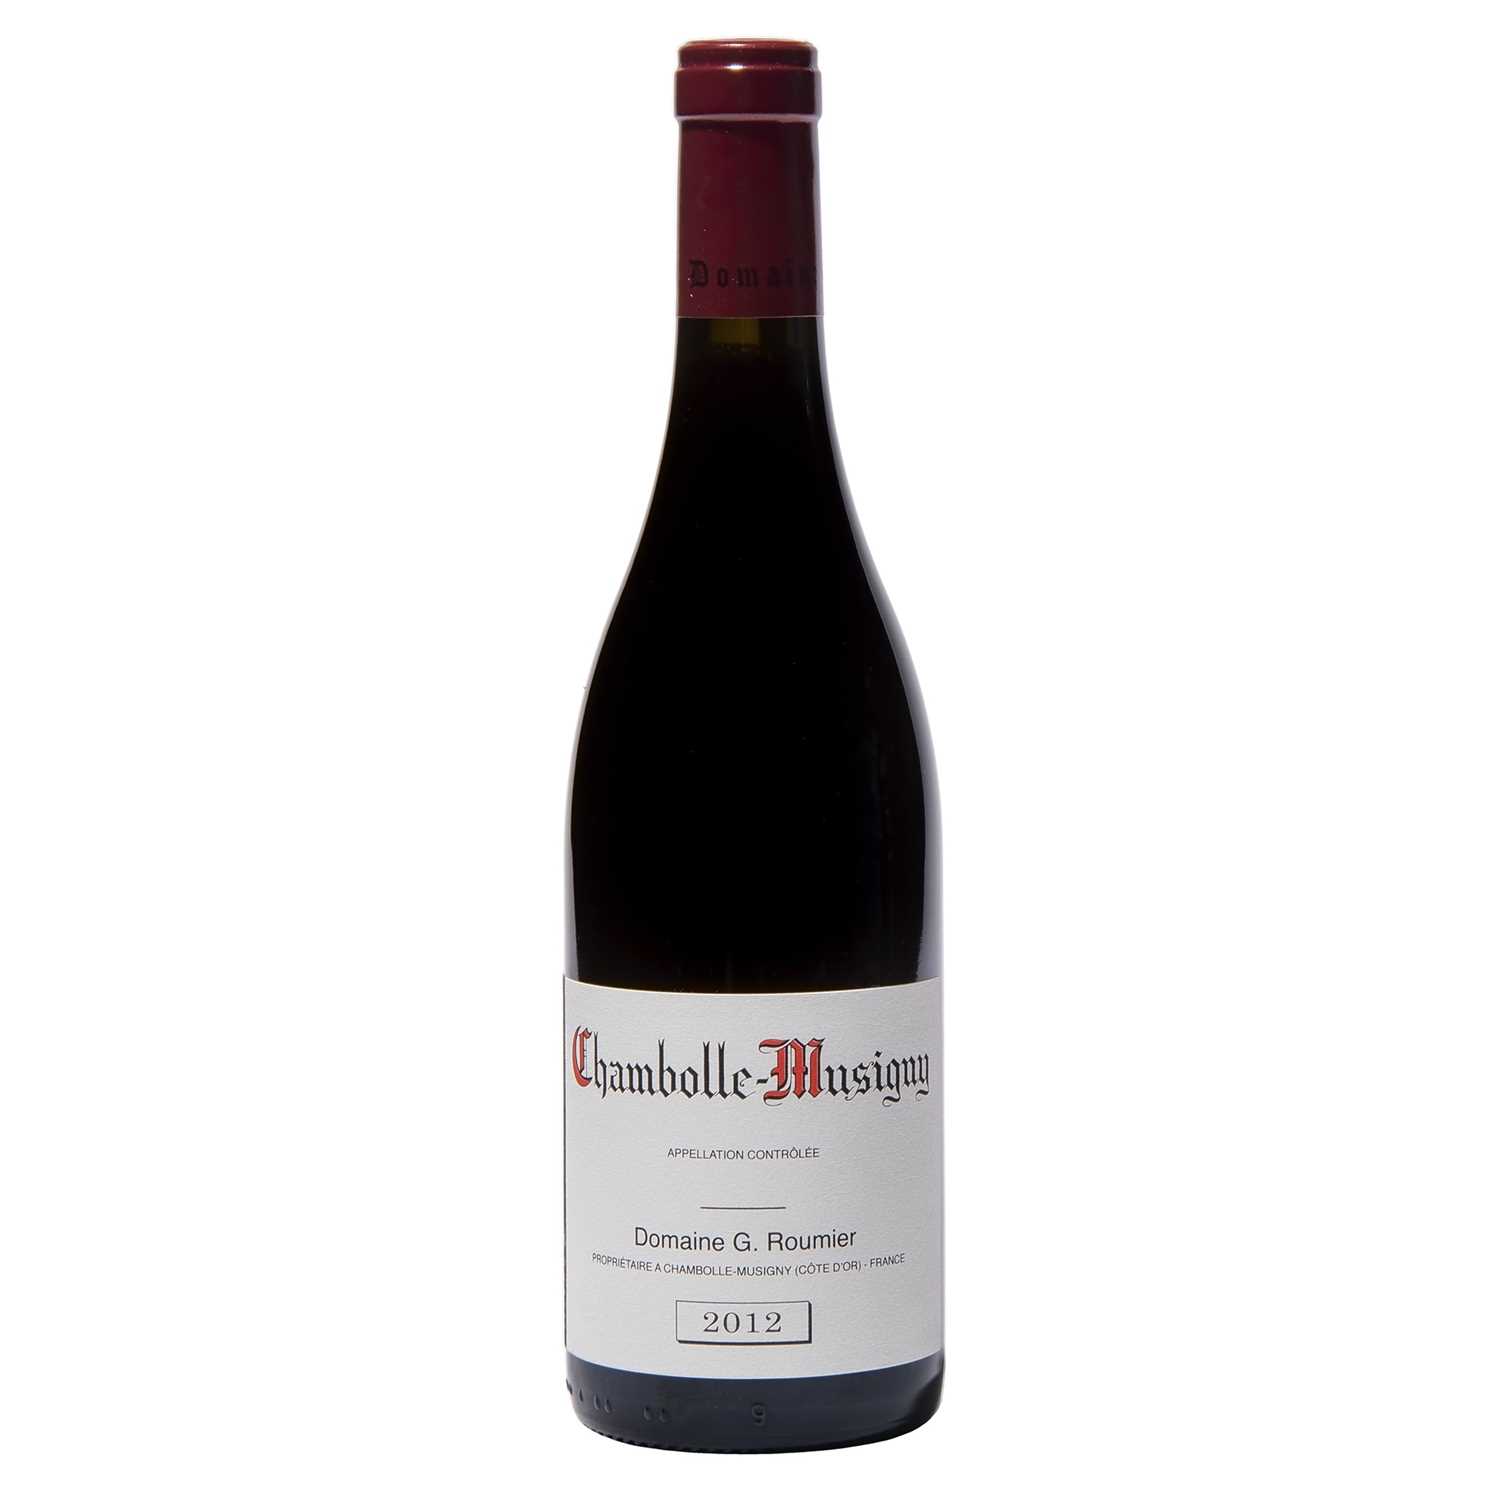 Lot 48 - 1 bottle 2012 Chambolle-Musigny Roumier